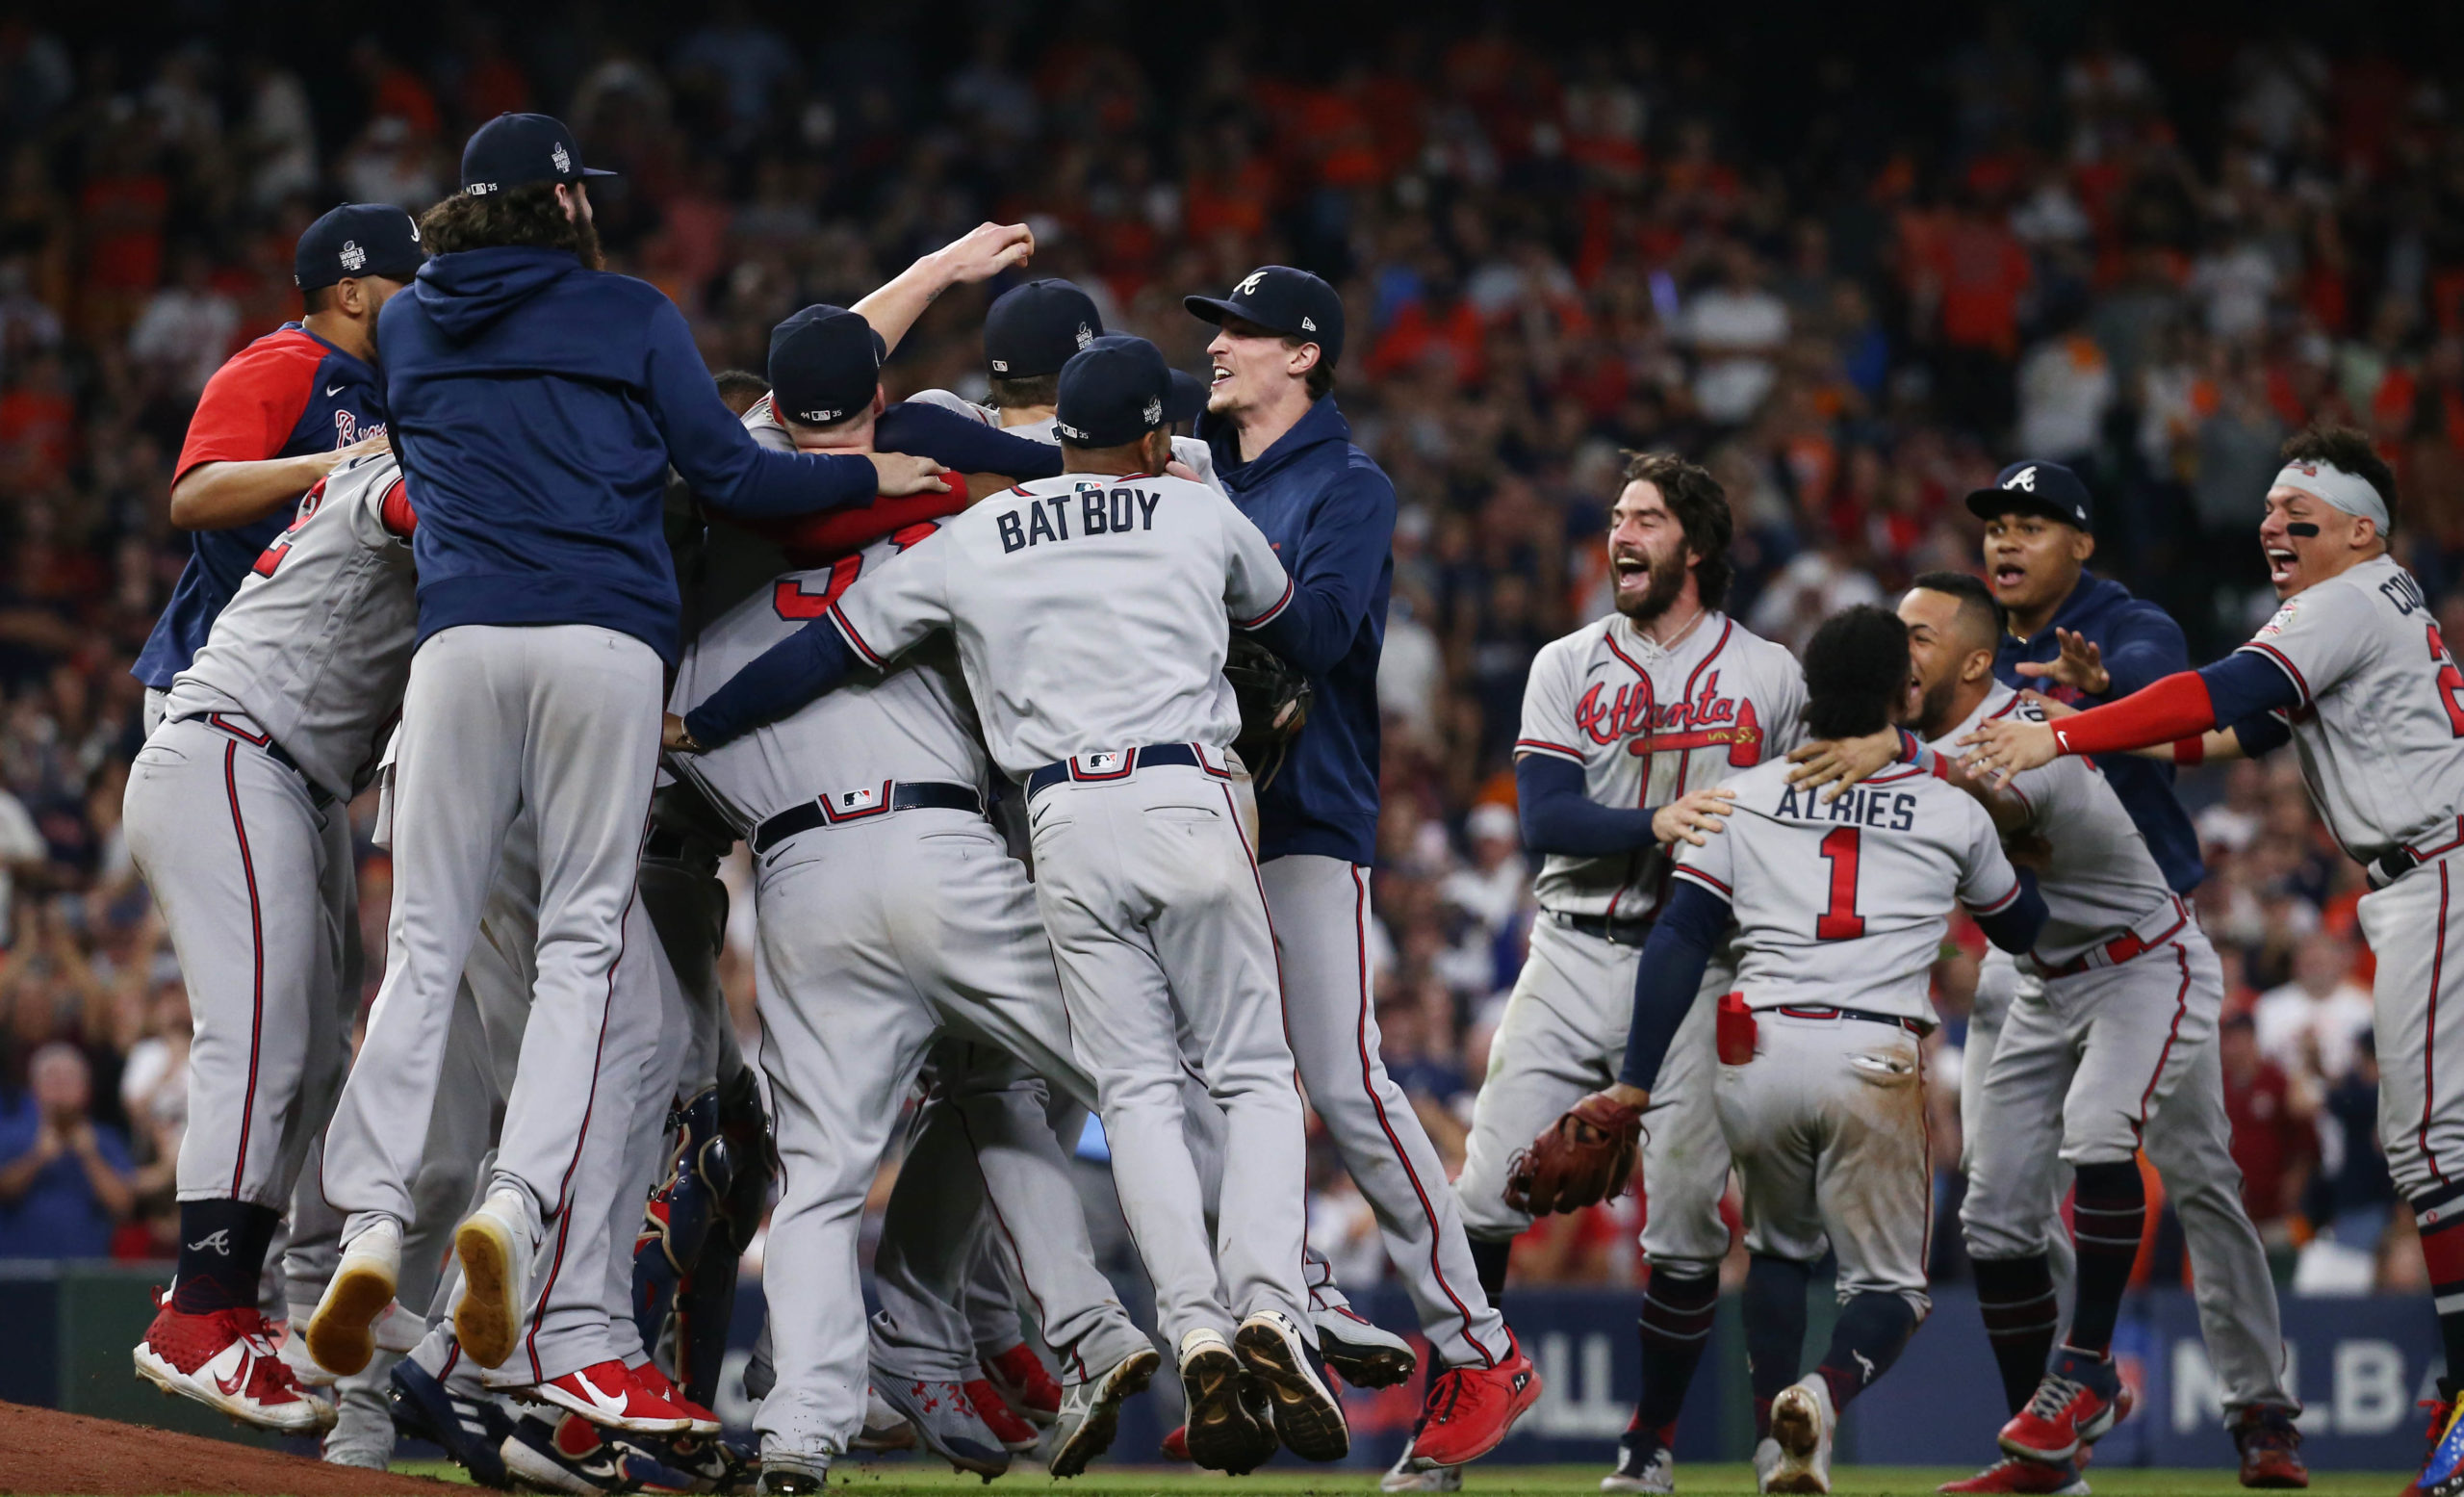  Atlanta Braves players celebrate after defeating the Houston Astros in game six of the 2021 World Series at Minute Maid Park.